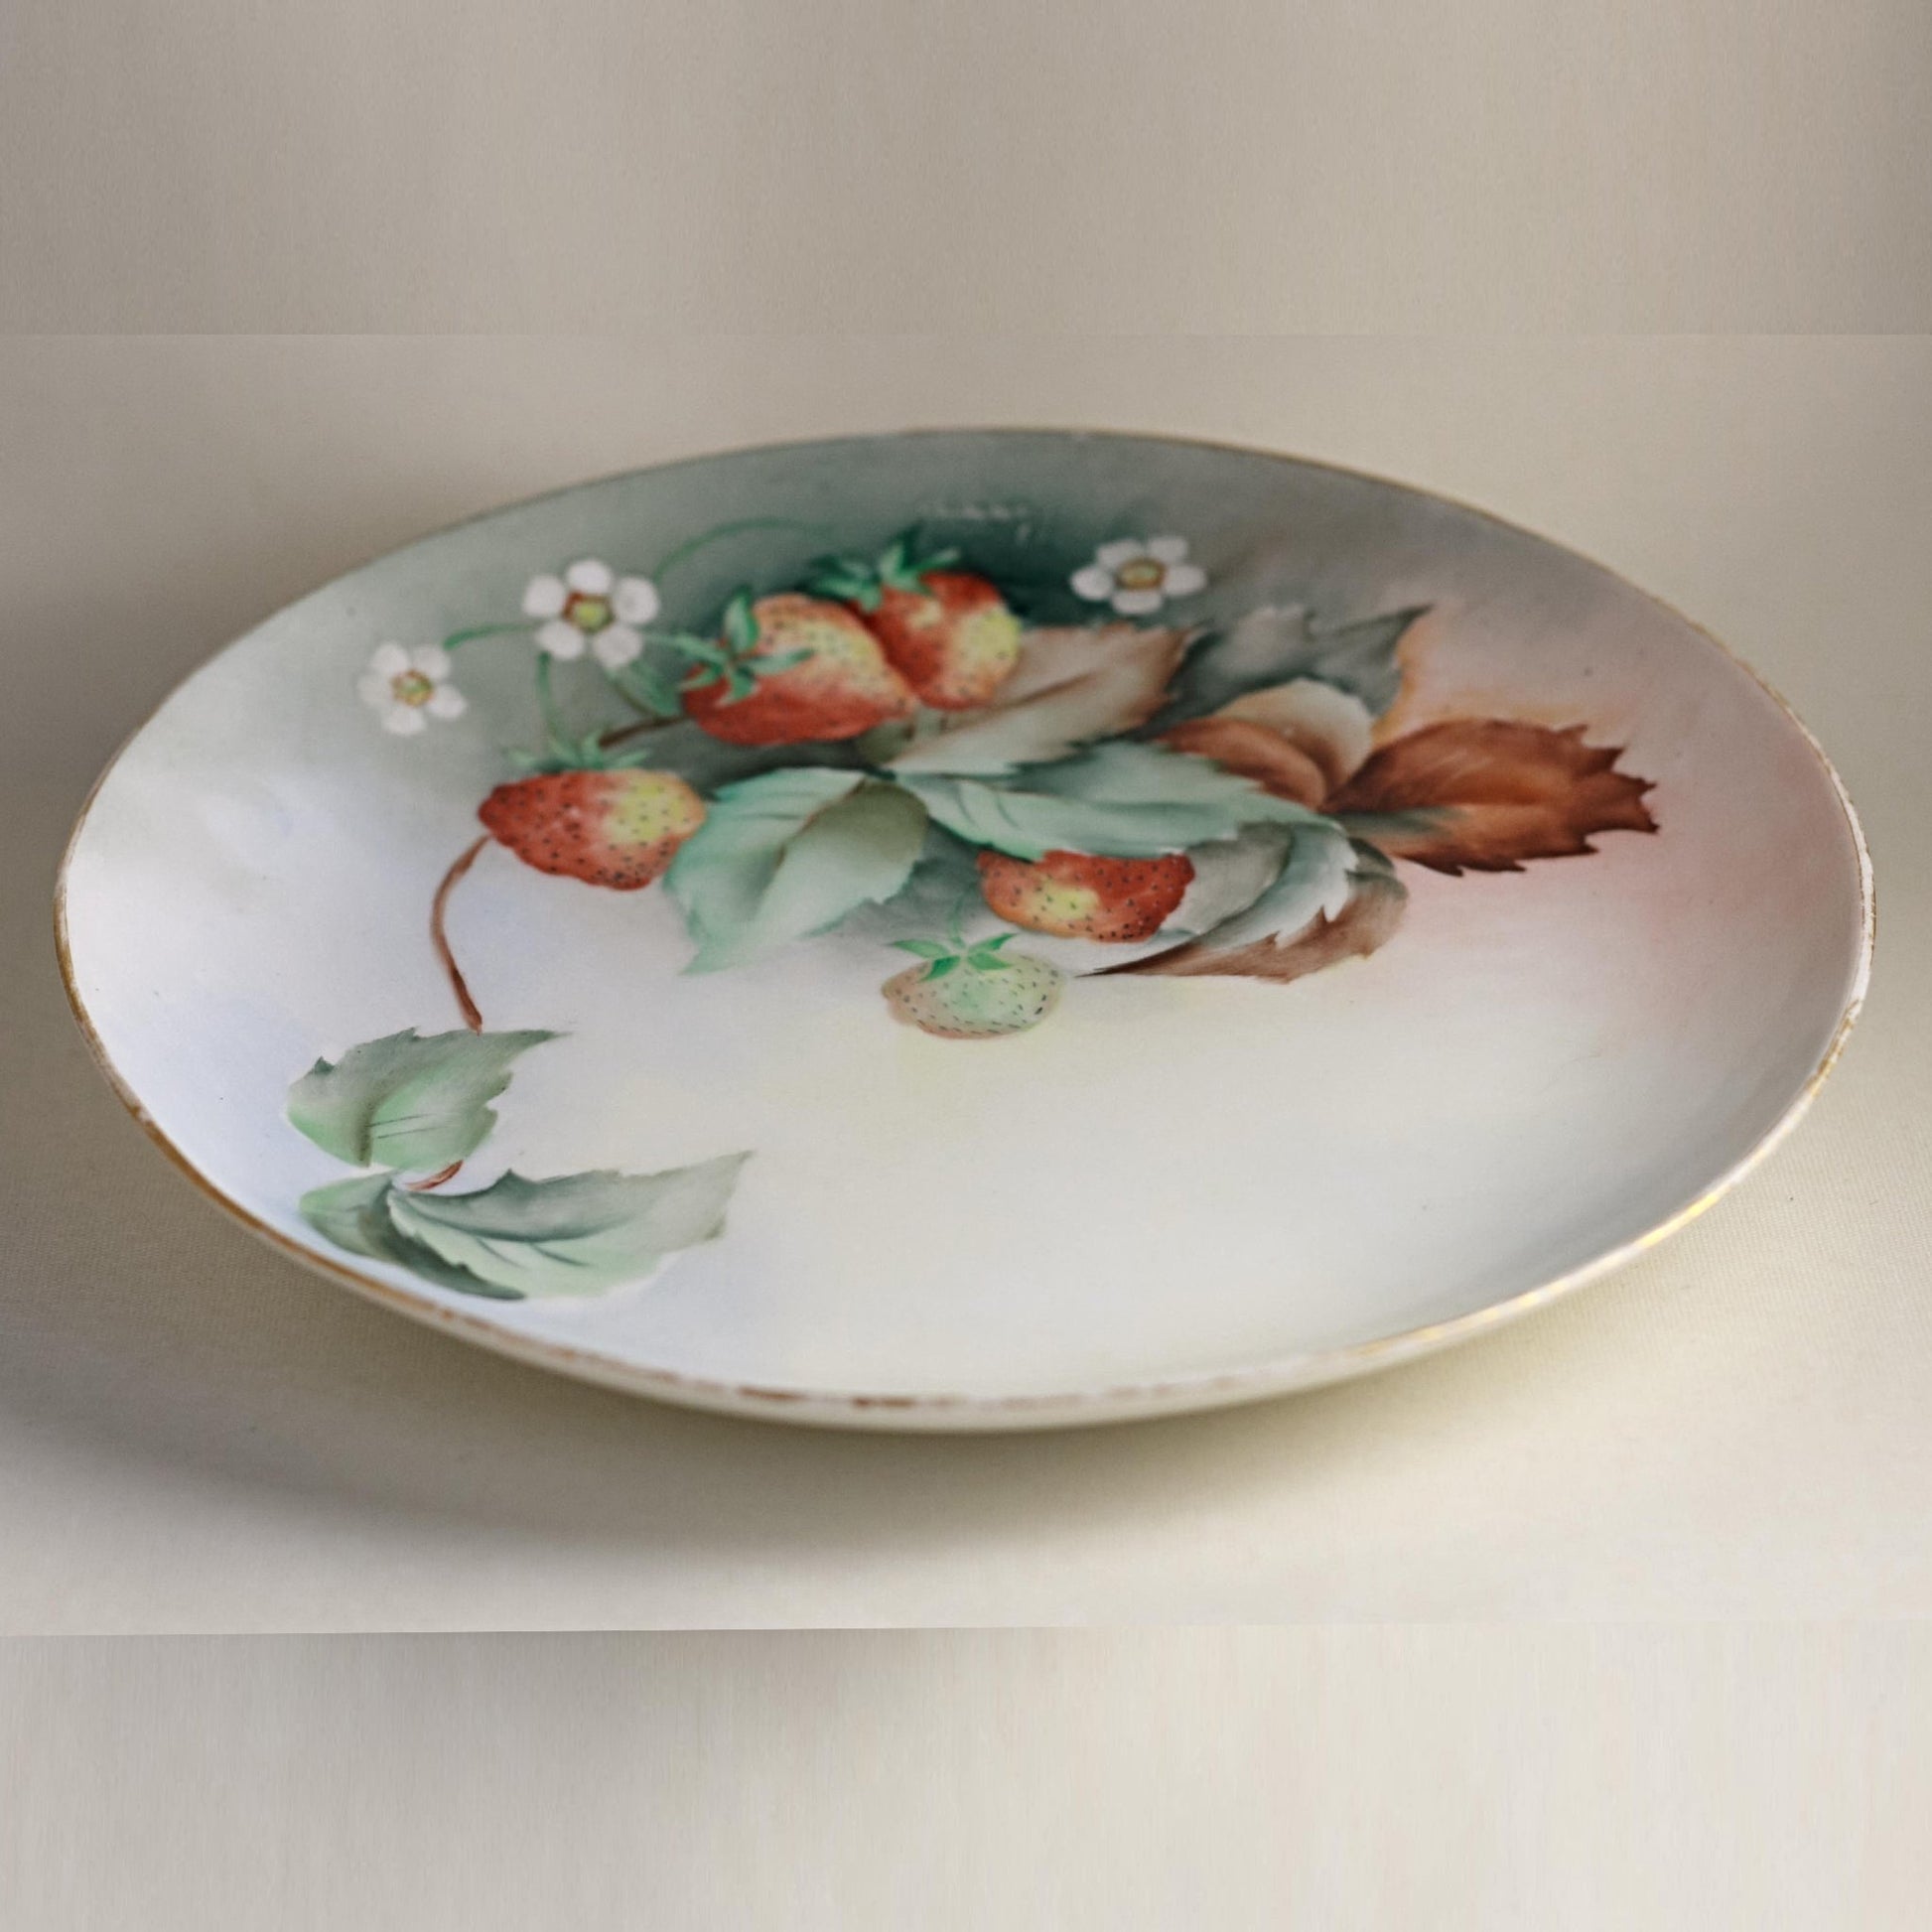 BoeM LIMOGES PORCELAN PLATE Hand Painted Plate with Strawberries Circa 1908 - 1914